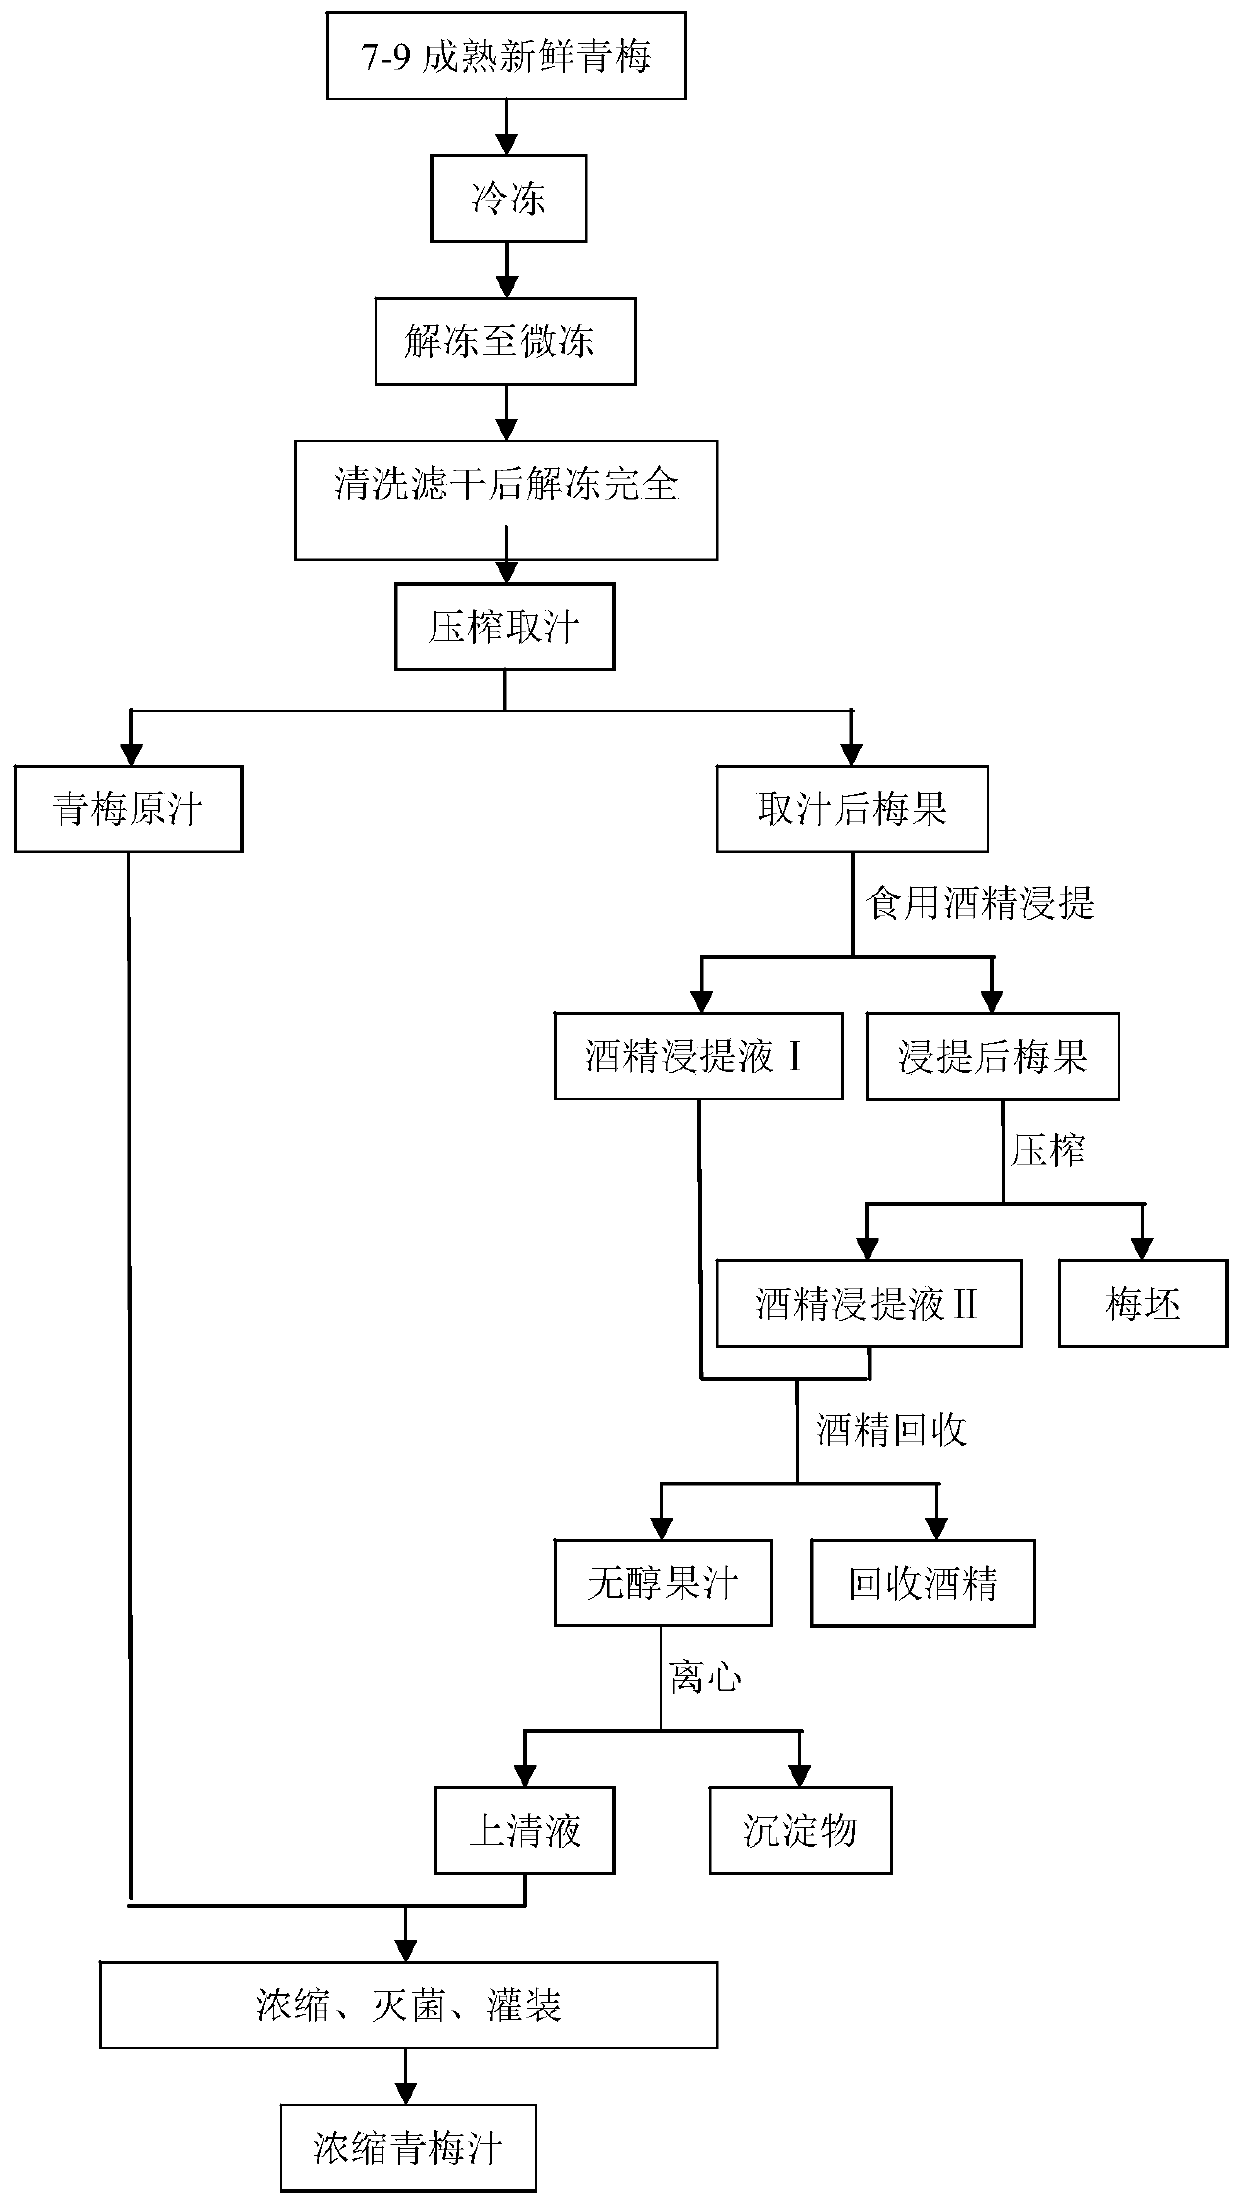 Production method of concentrated green plum juice